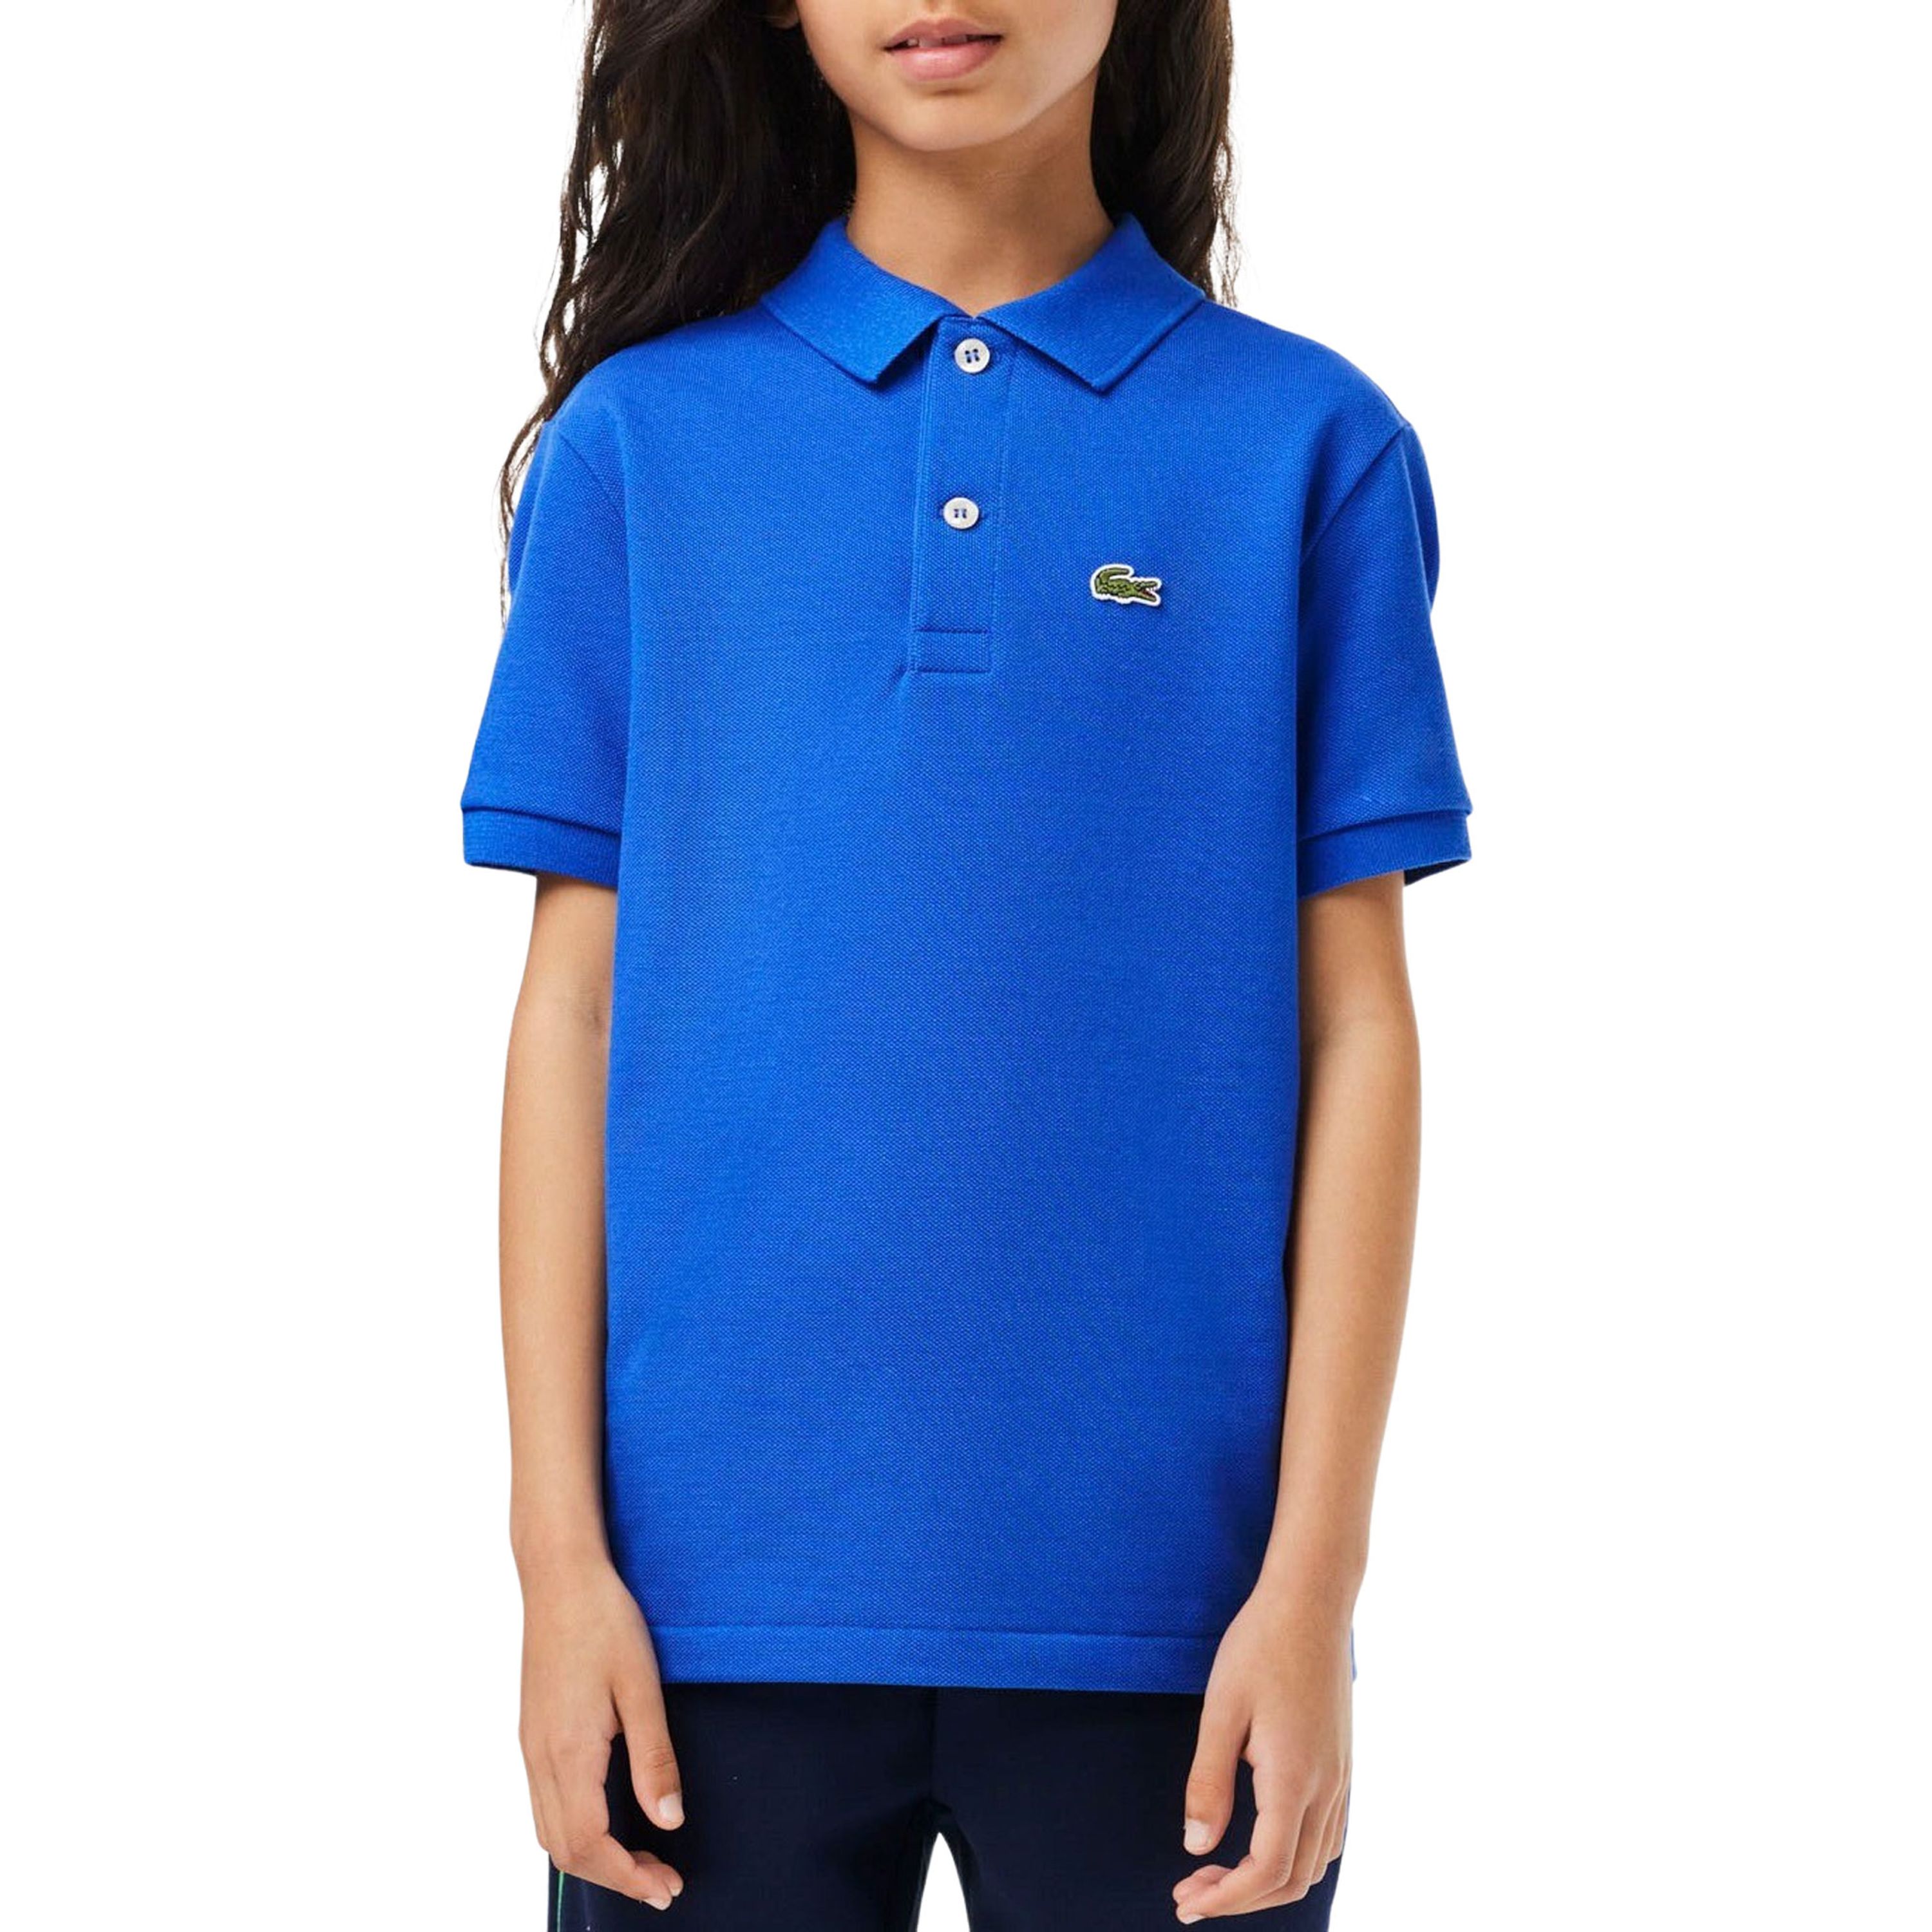 Lacoste Poloshirt met labelstitching